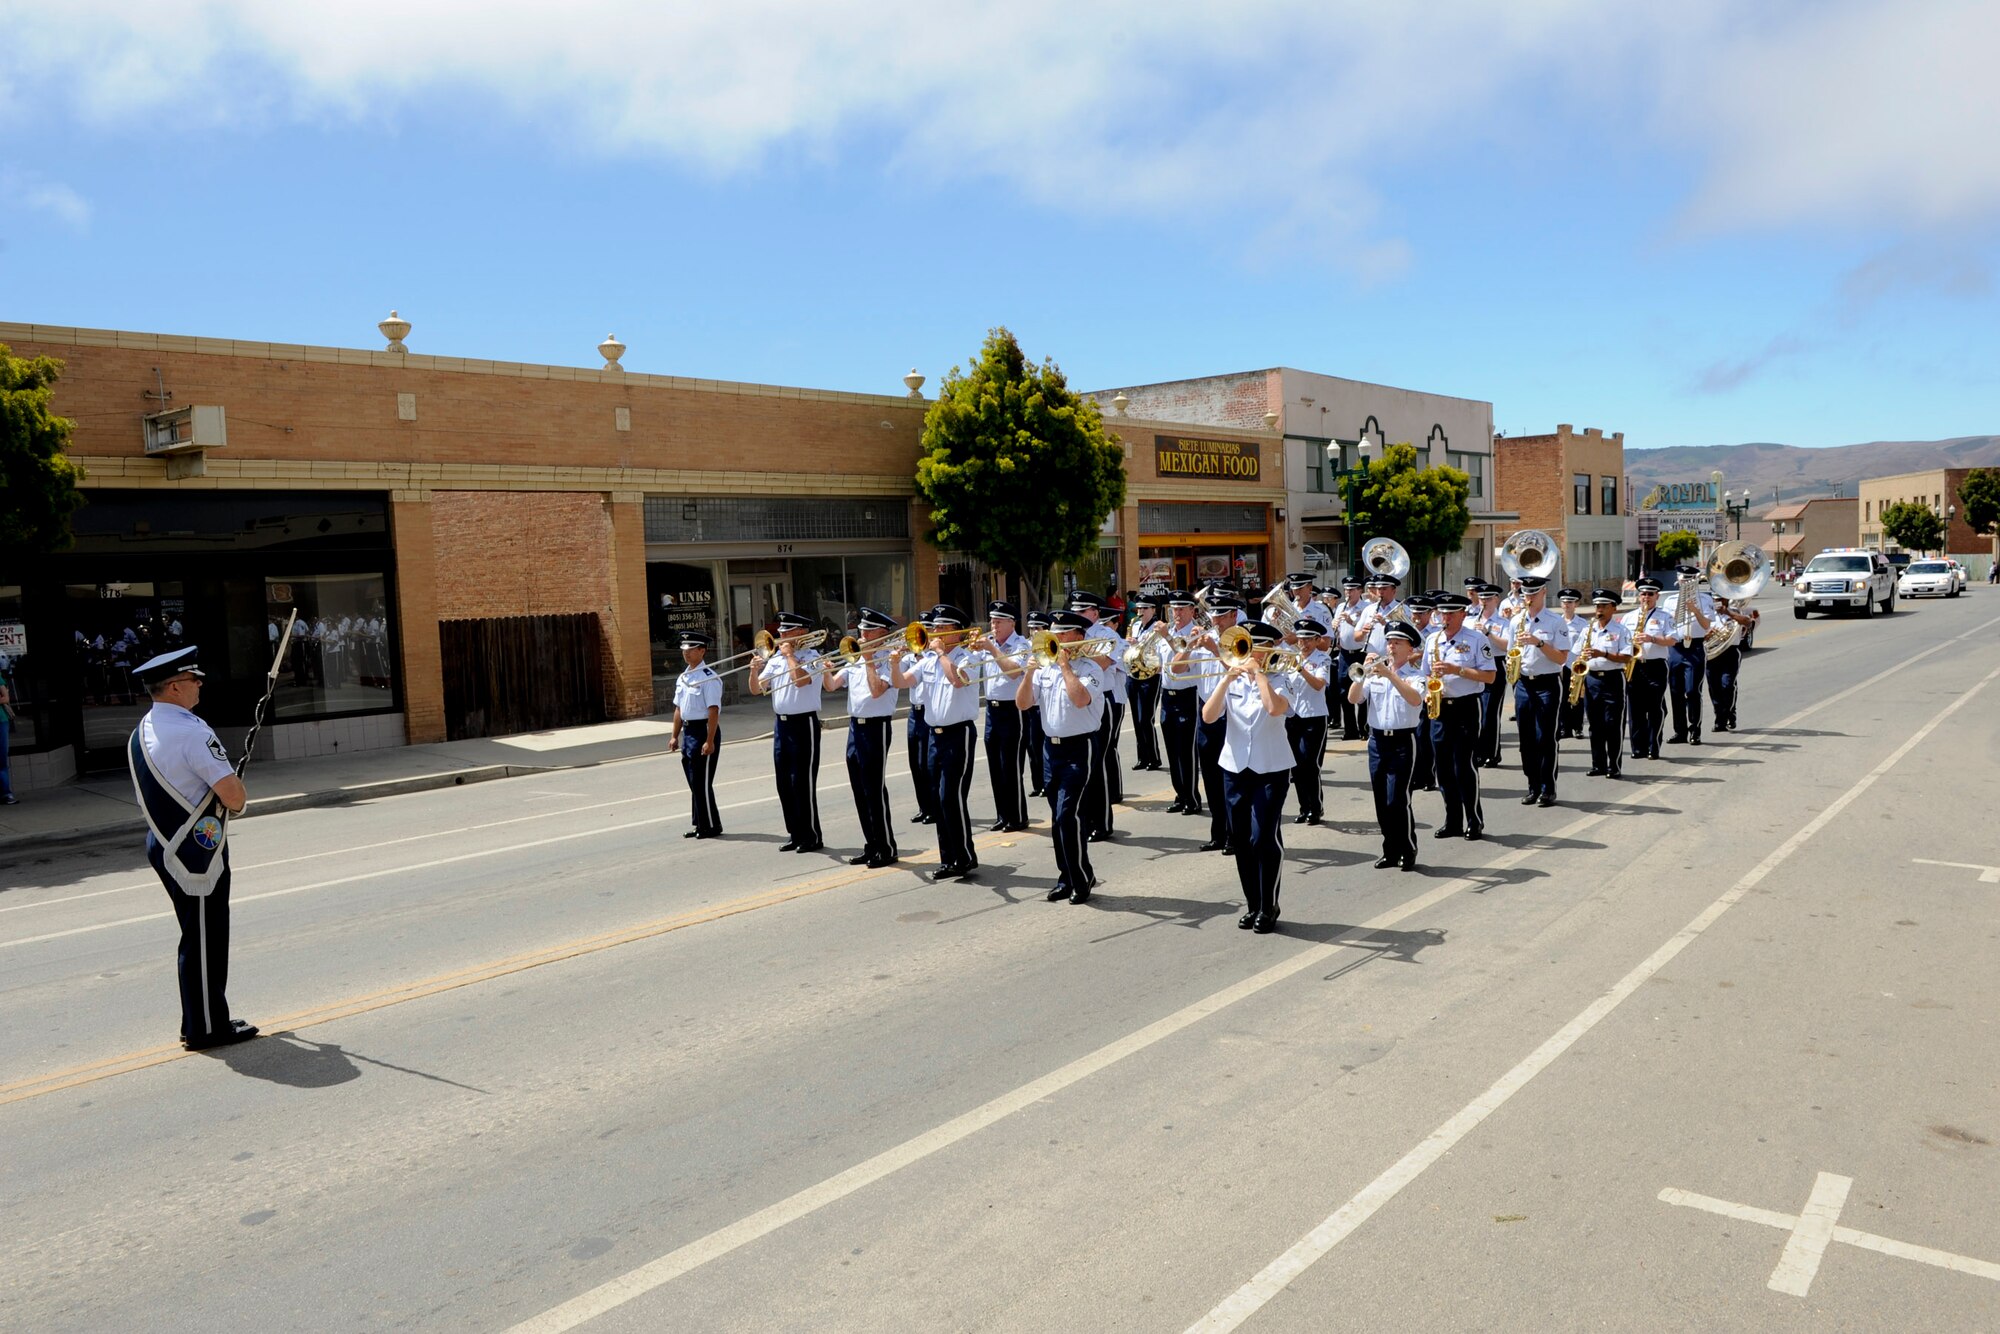 VANDENBERG AIR FORCE BASE, Calif. -- The Air National Guard Band of the West Coast marches in the Celebrate Heroes Parade in Guadalupe Saturday, June 30, 2012. The parade was a recognition of active and veteran members of the military and the city of Guadalupe intends to continue that recognition annually. (U.S. Air Force photo/Staff Sgt. Levi Riendeau)
